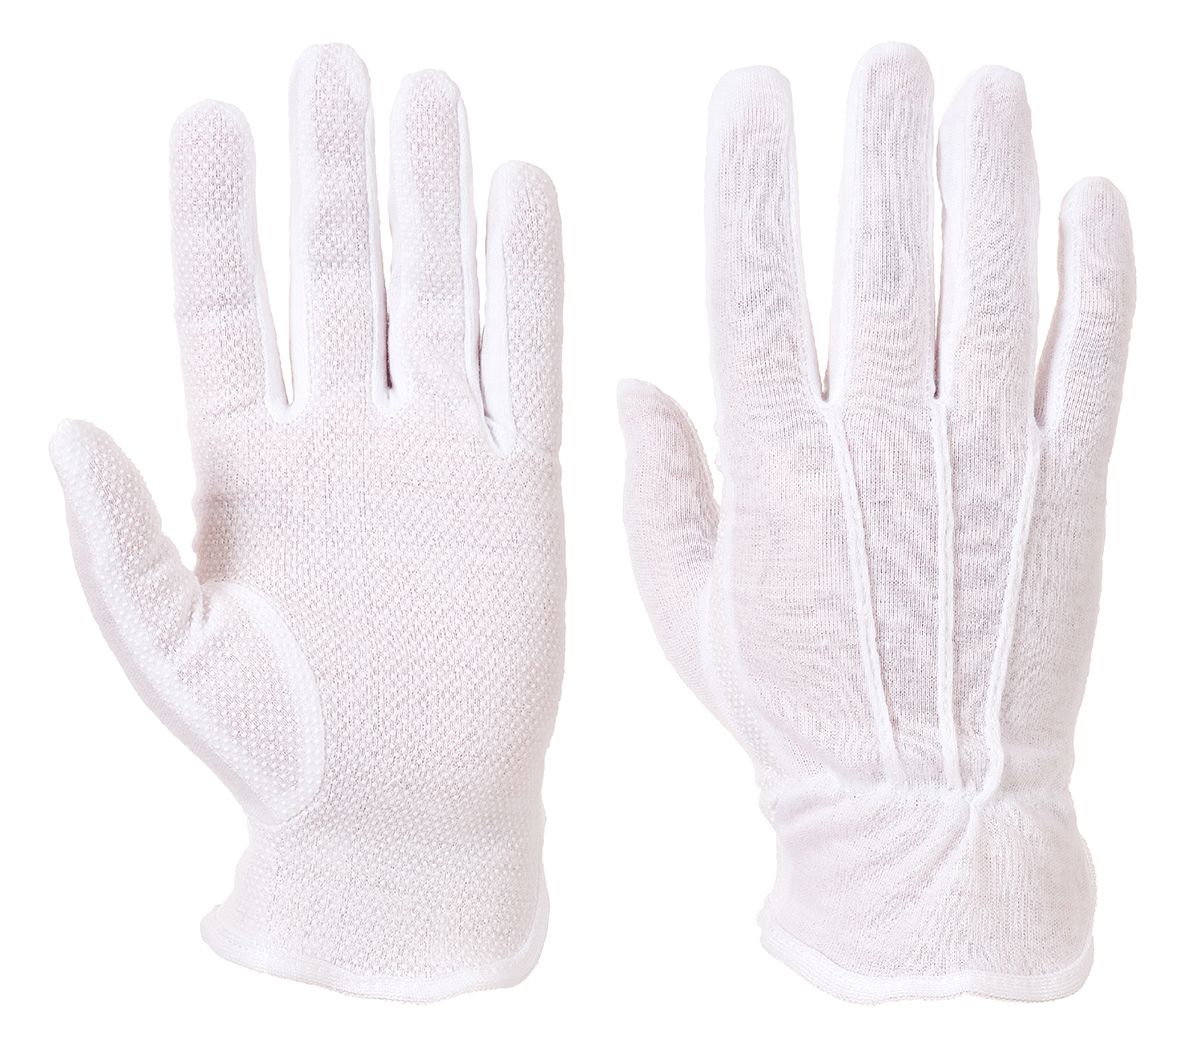 RS PRO White Cotton General Purpose Work Gloves, Size 10, Large